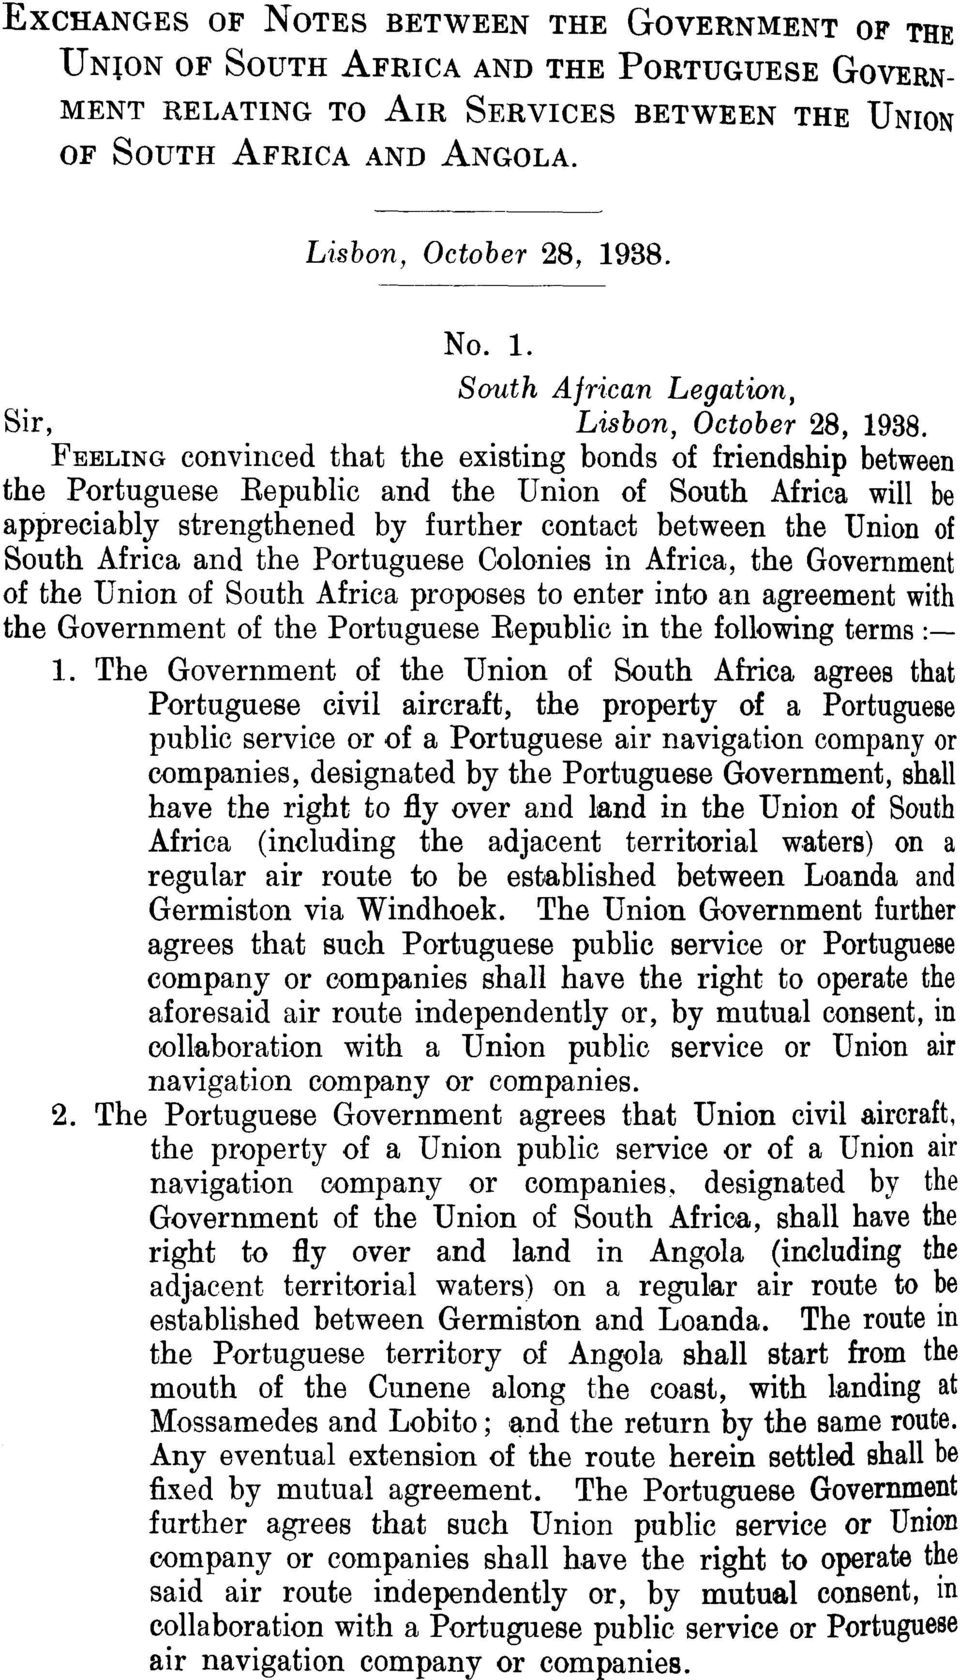 FEELING convinced that the existing bonds of friendship between the Portuguese Republic and the Union of South Africa will be appreciably strengthened by further contact between the Union of South